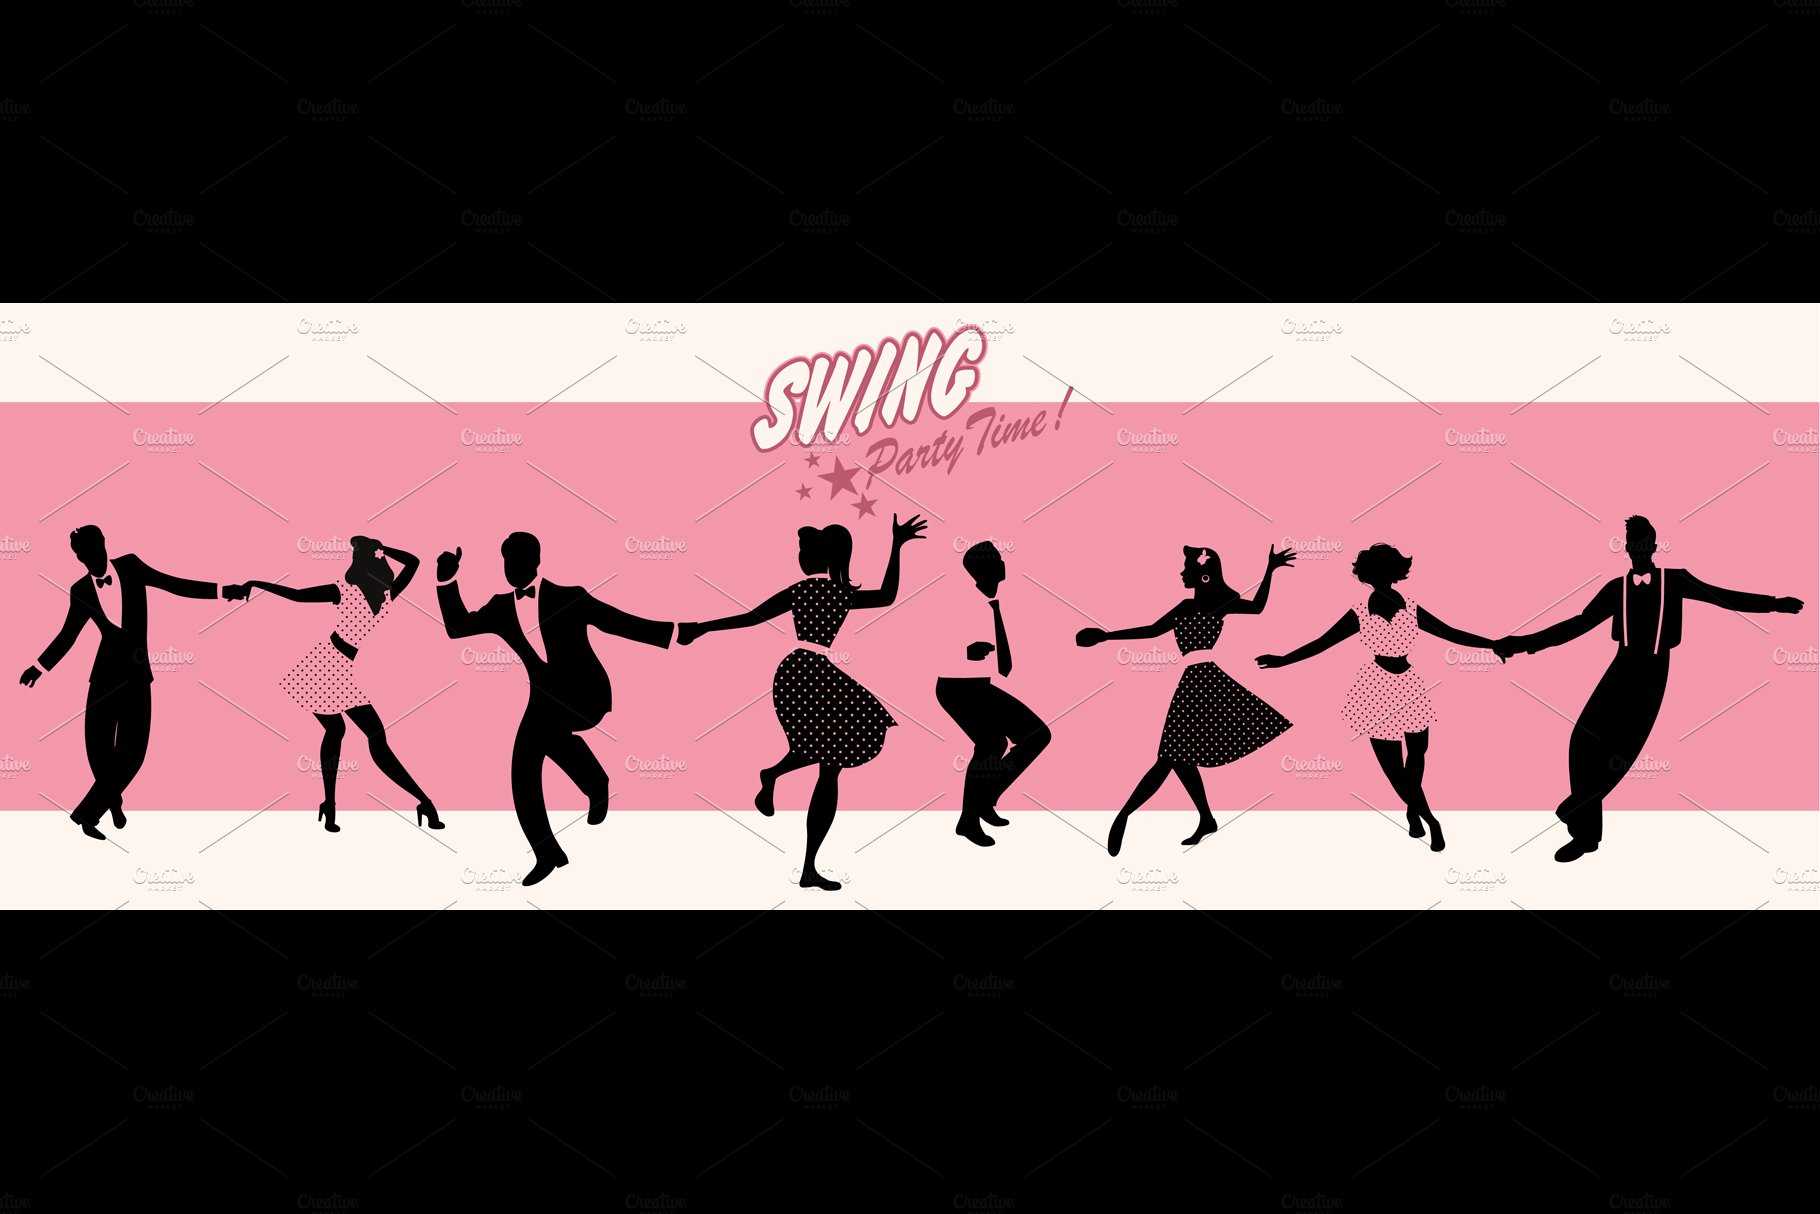 Start the swing! cover image.